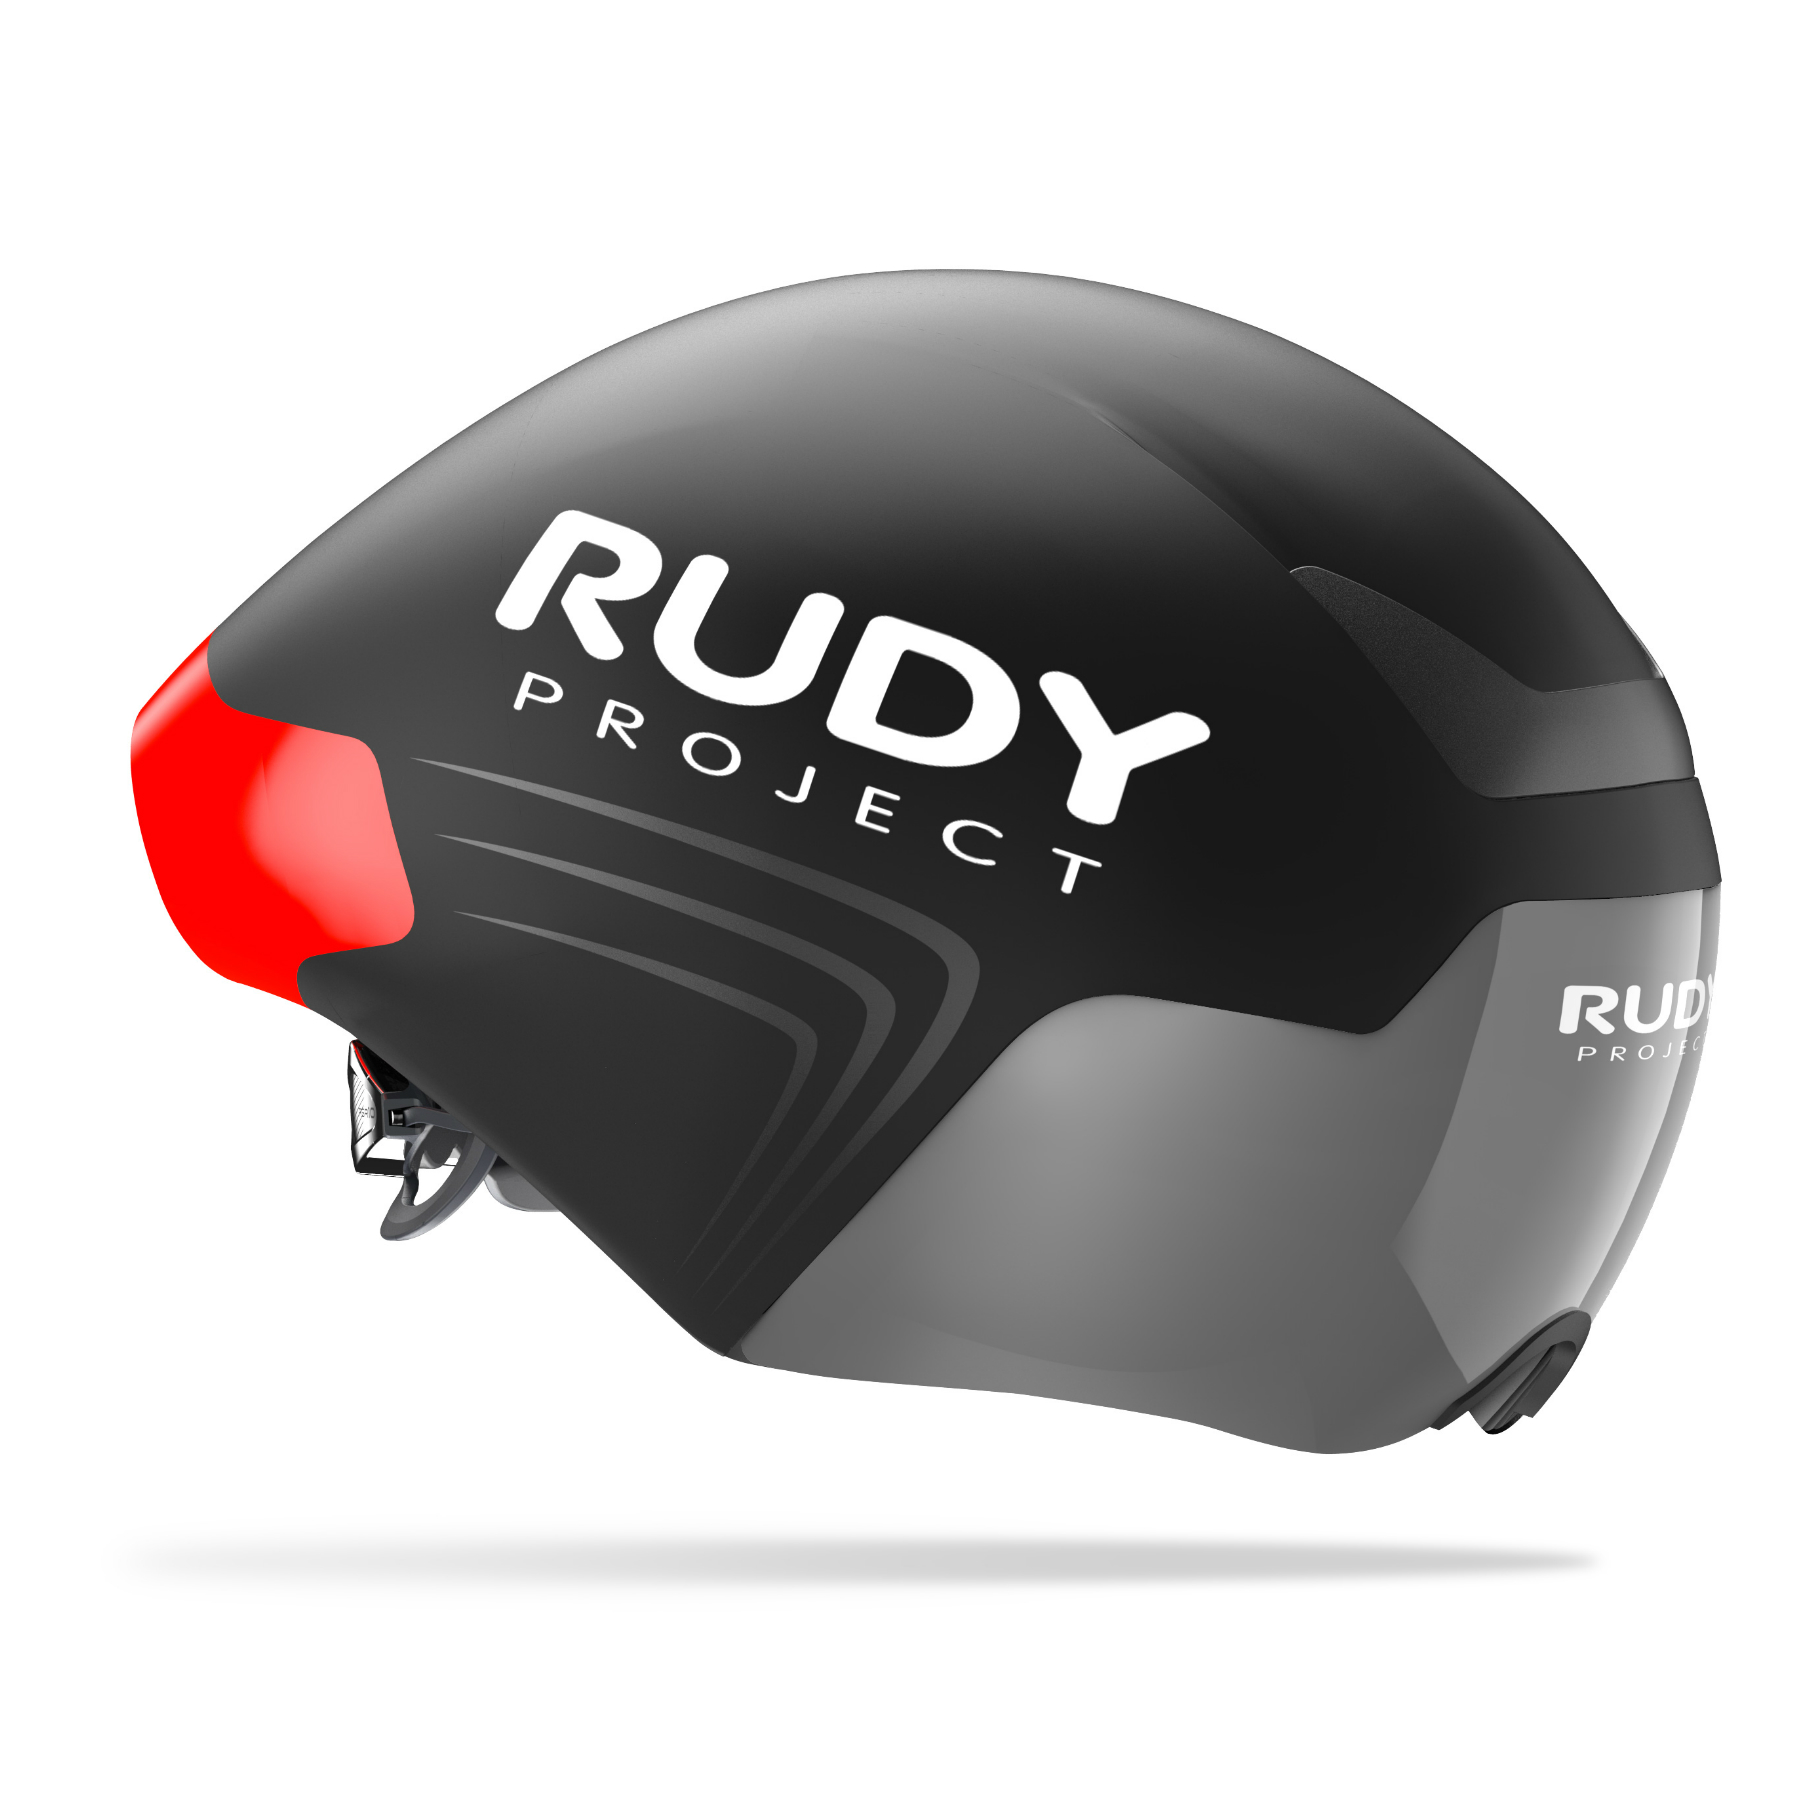 Rudy Project Helmet Size Chart